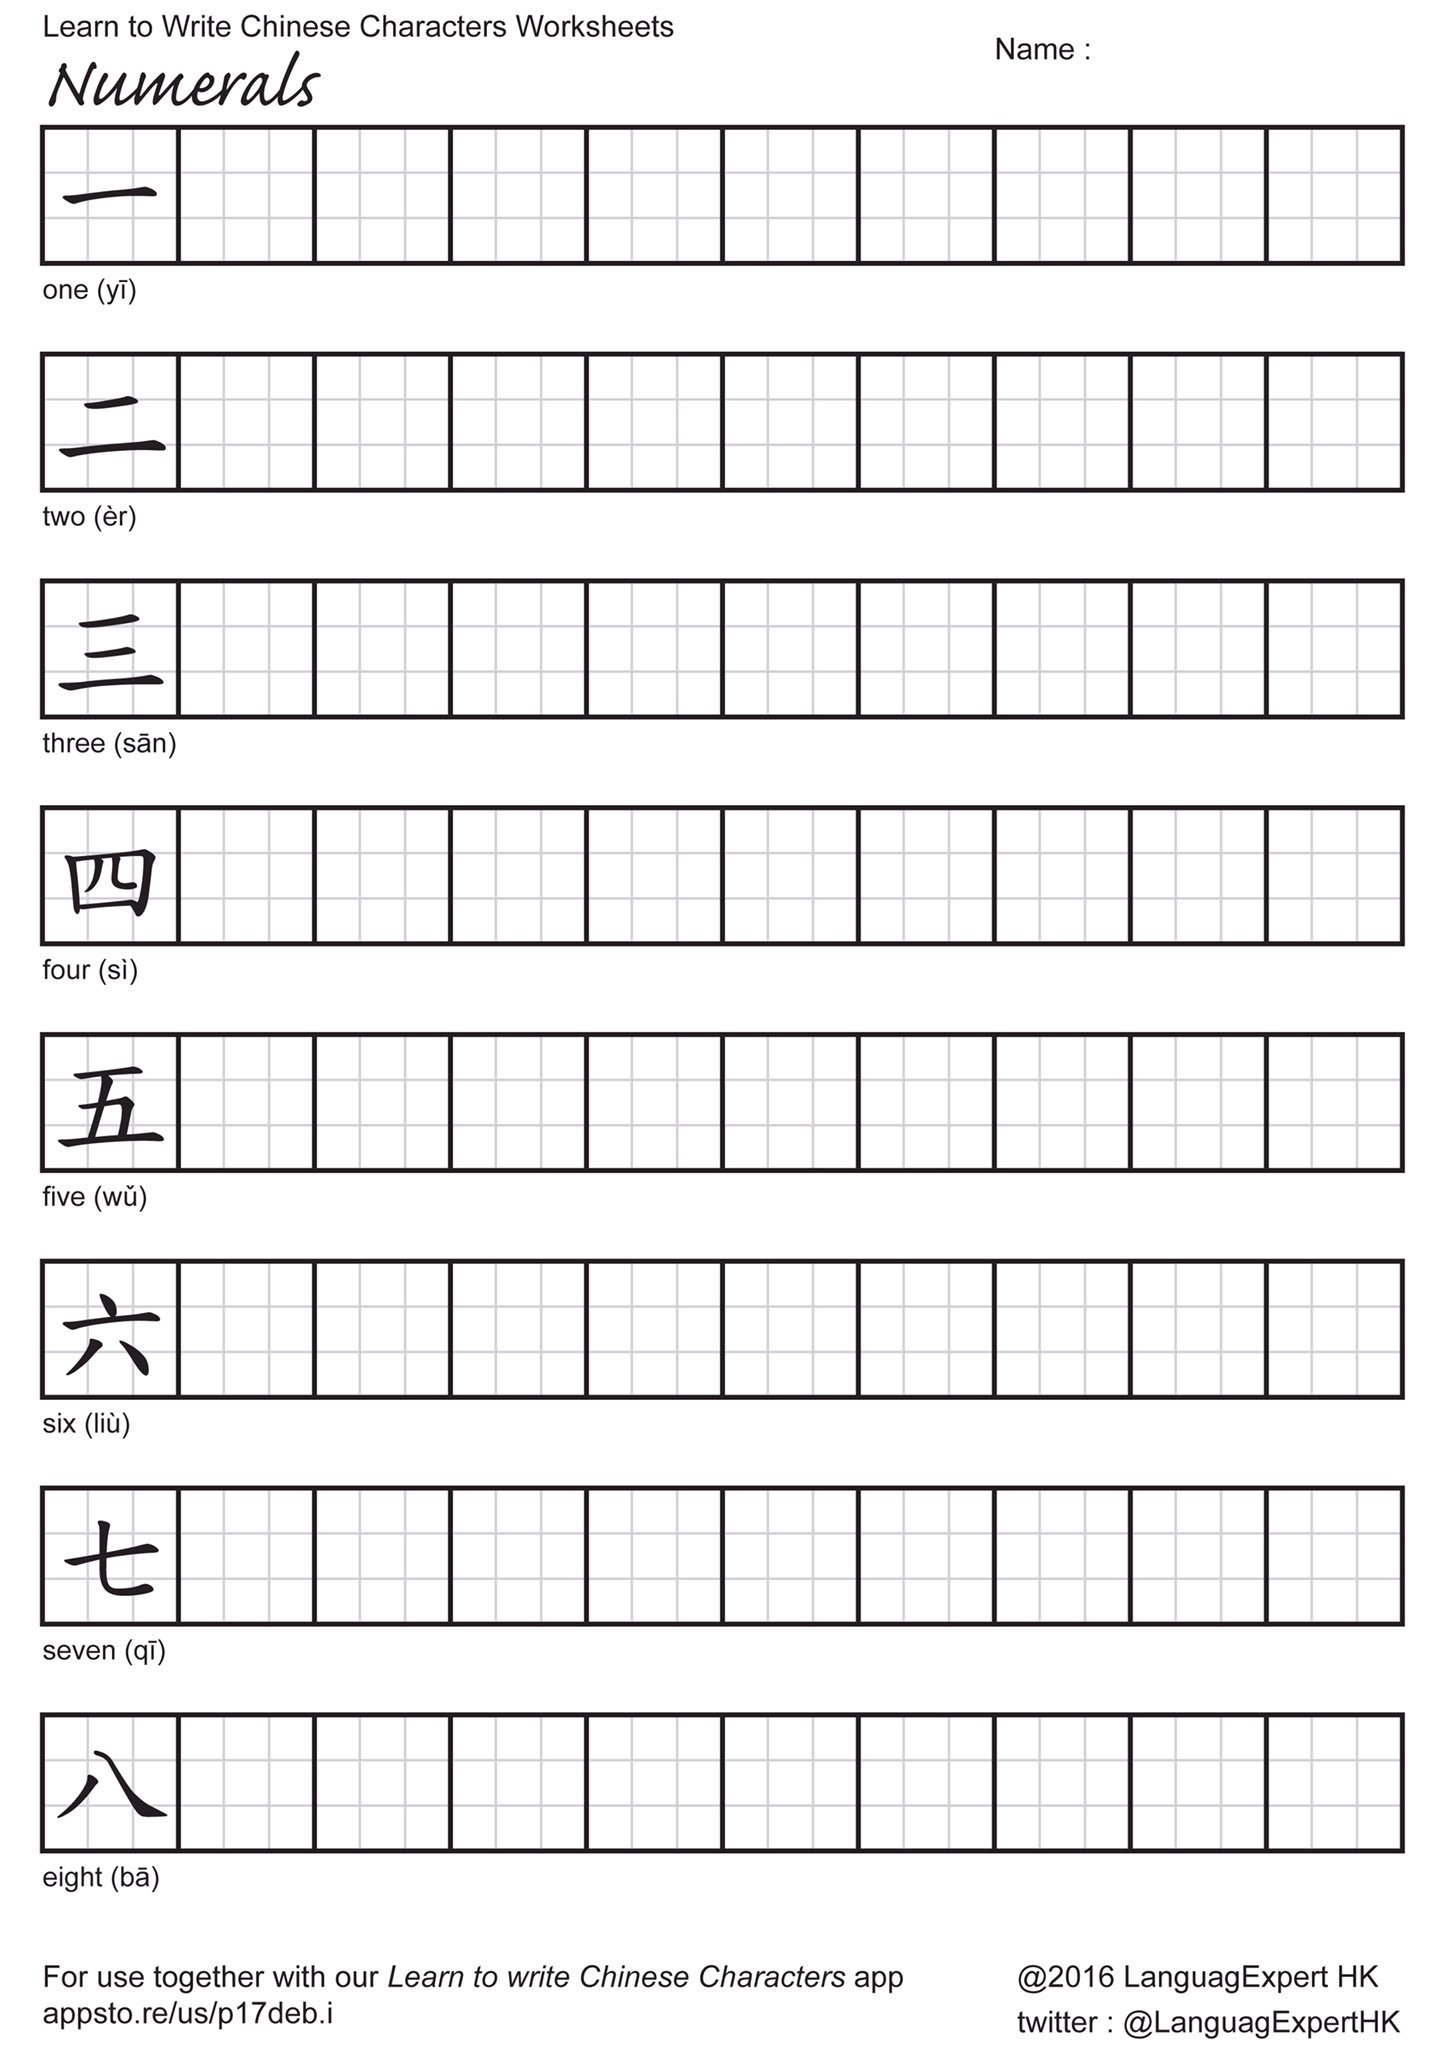 LearnToWriteChinese on Twitter: "Learn to Write Chinese Worksheets